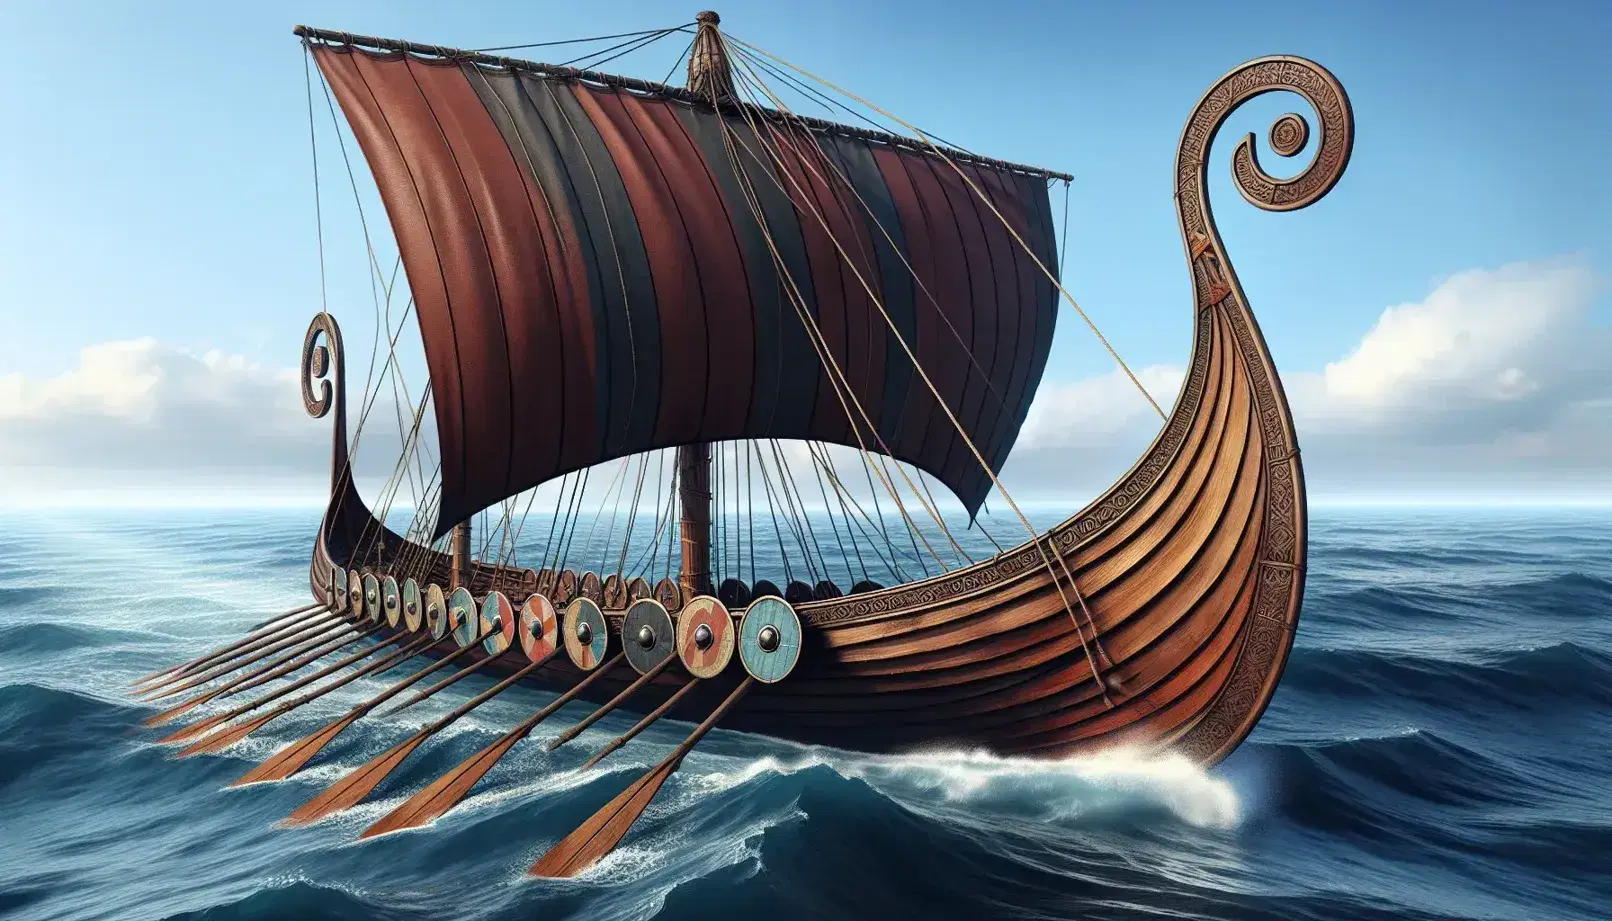 Traditional Viking longship with red sail and ornate prows on a blue sea, shields lining the hull, near a rugged coastline under a clear sky.